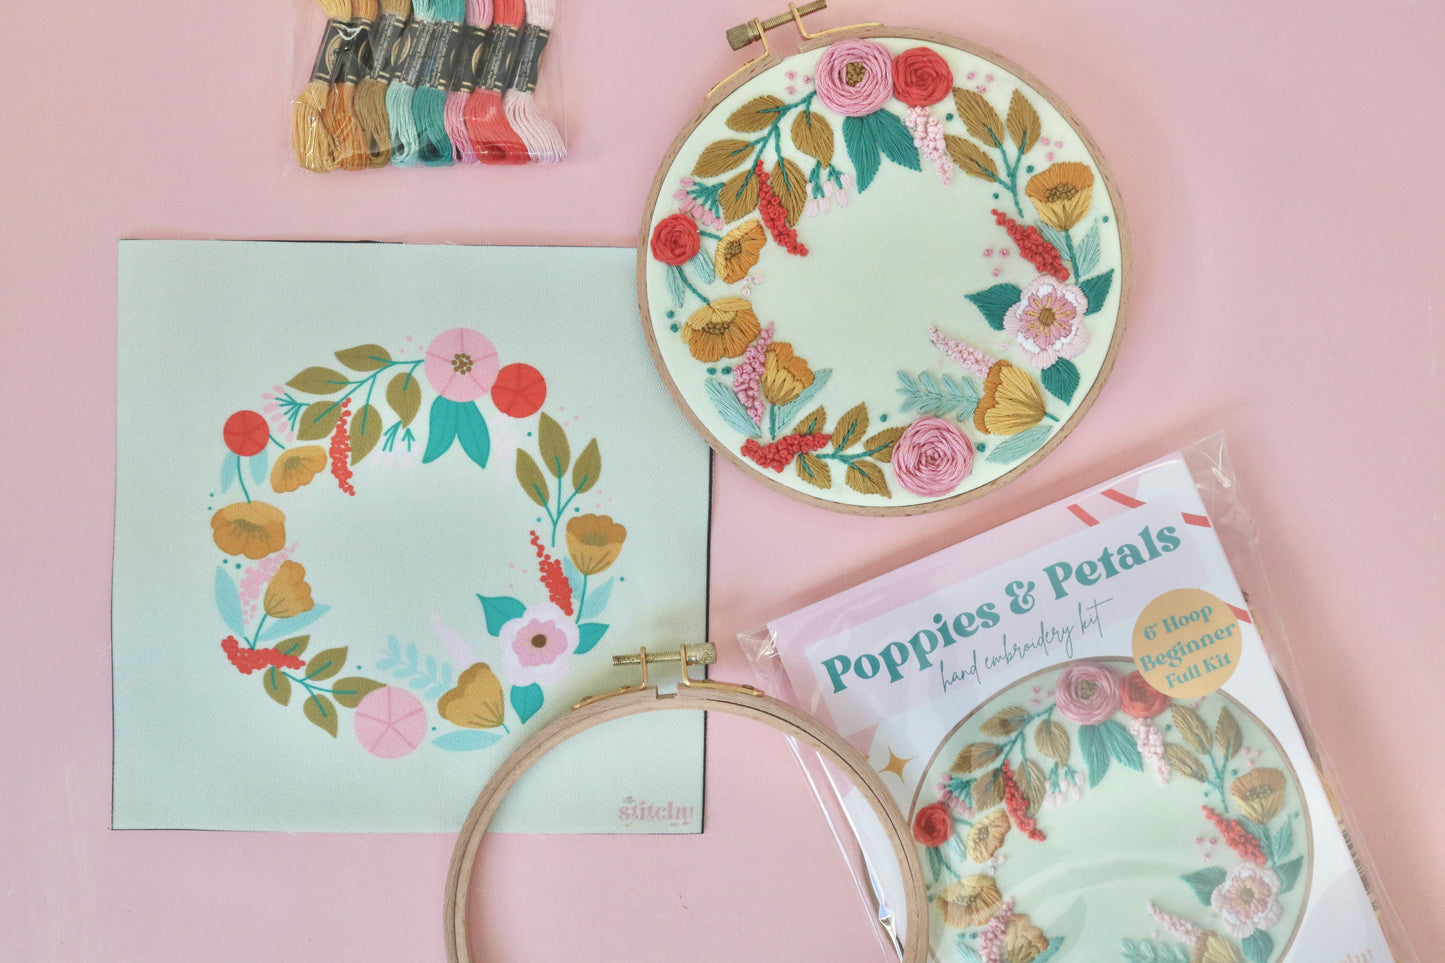 6" Poppies and Petals Floral Embroidery Kit - Beginner